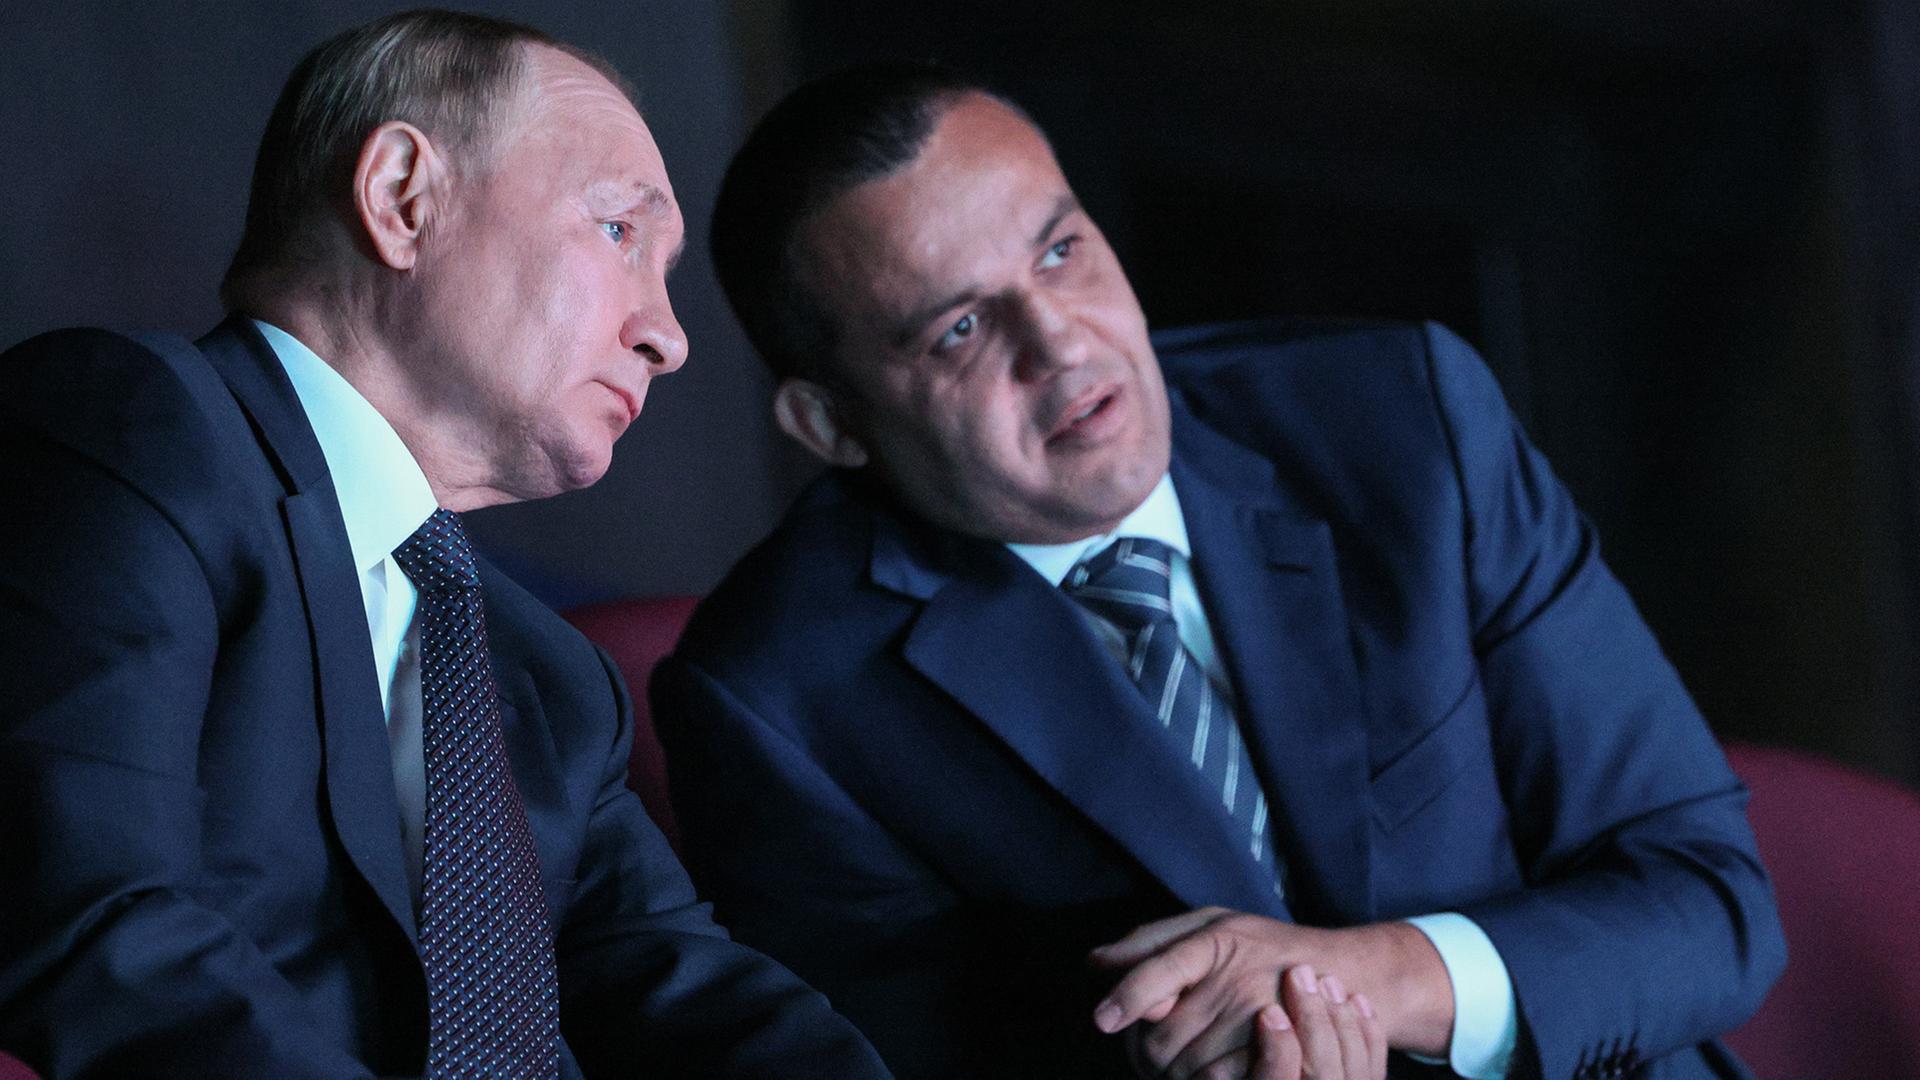 DIESES FOTO WIRD VON DER RUSSISCHEN STAATSAGENTUR TASS ZUR VERFÃGUNG GESTELLT. [MOSCOW, RUSSIA - SEPTEMBER 10, 2022: RussiaÂs President Vladimir Putin (L) and International Boxing Association (AIBA) President Umar Kremlev attend the opening of the International Sambo and Boxing centre at the Luzhniki Sports Complex. The seven-floor centre houses sambo and boxing facilities with a total floorspace of 45.6 thousand square metres; the centre's main architectural feature is a sloping glass ceiling with an optical effect that allows the public to watch athletesÂ training from the street. Gavriil Grigorov/POOL/TASS]